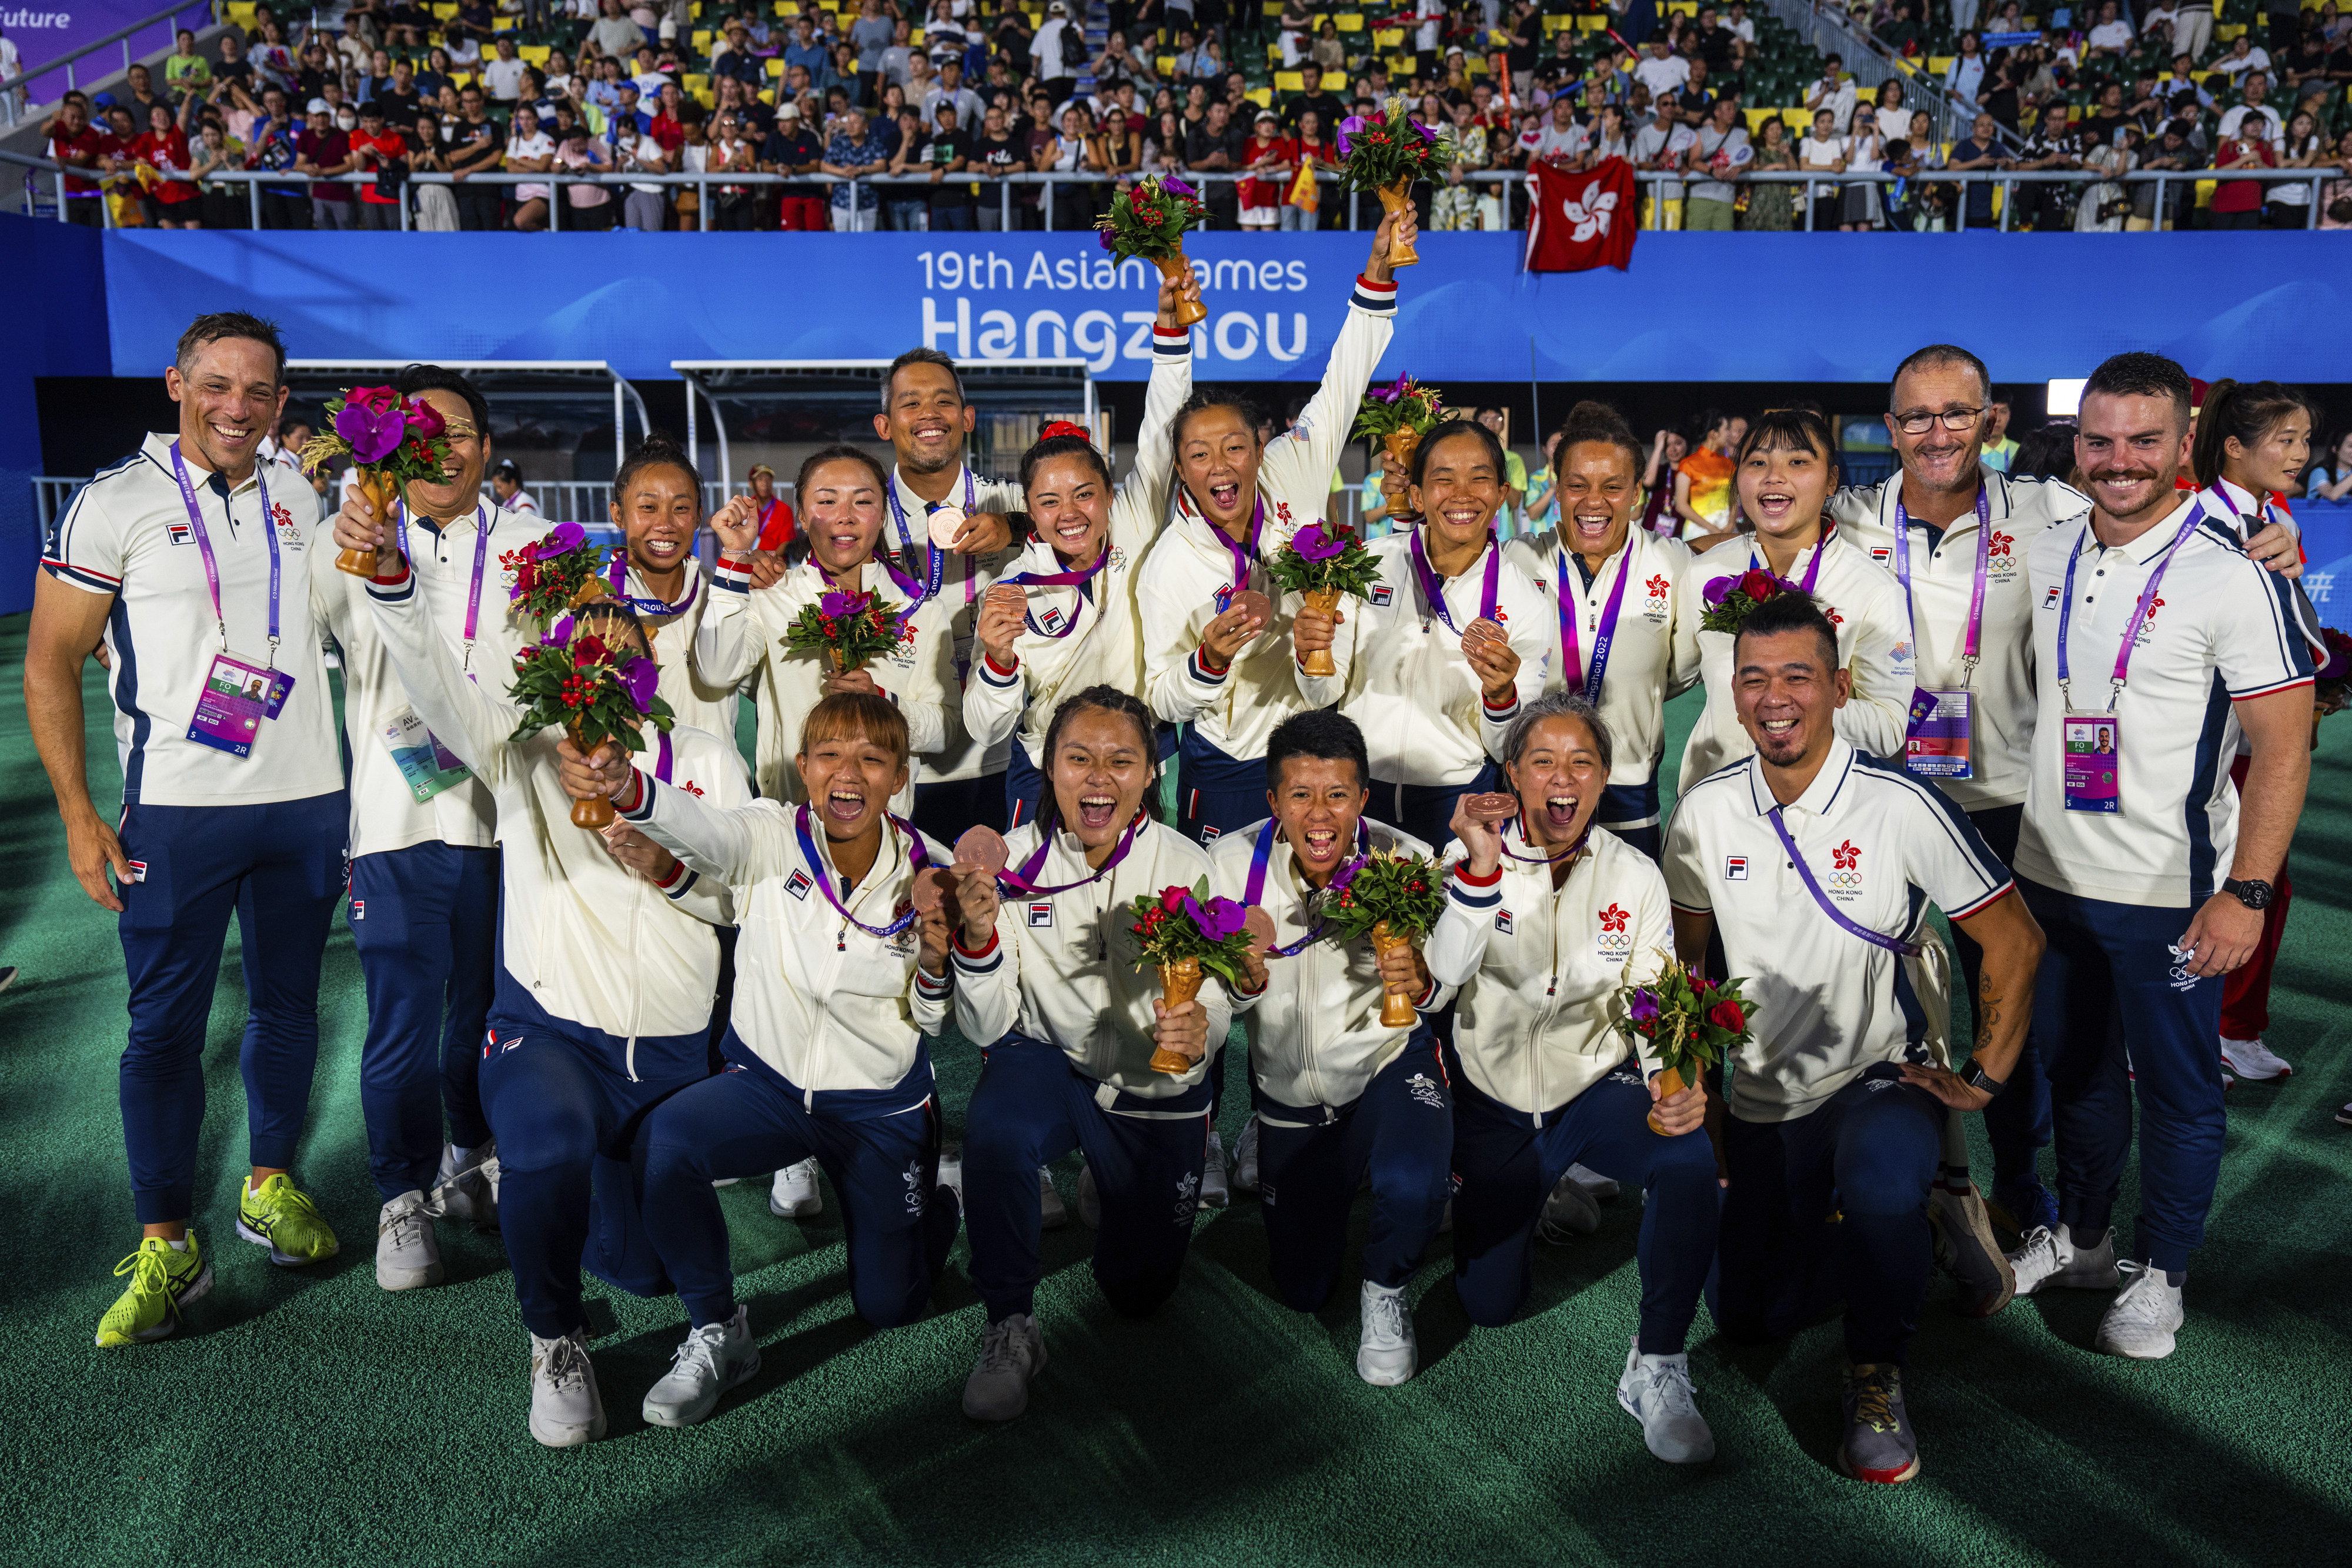 Hong Kong’s women’s sevens team celebrate with their bronze medals at the Asian Games in Hangzhou. Photo: AP